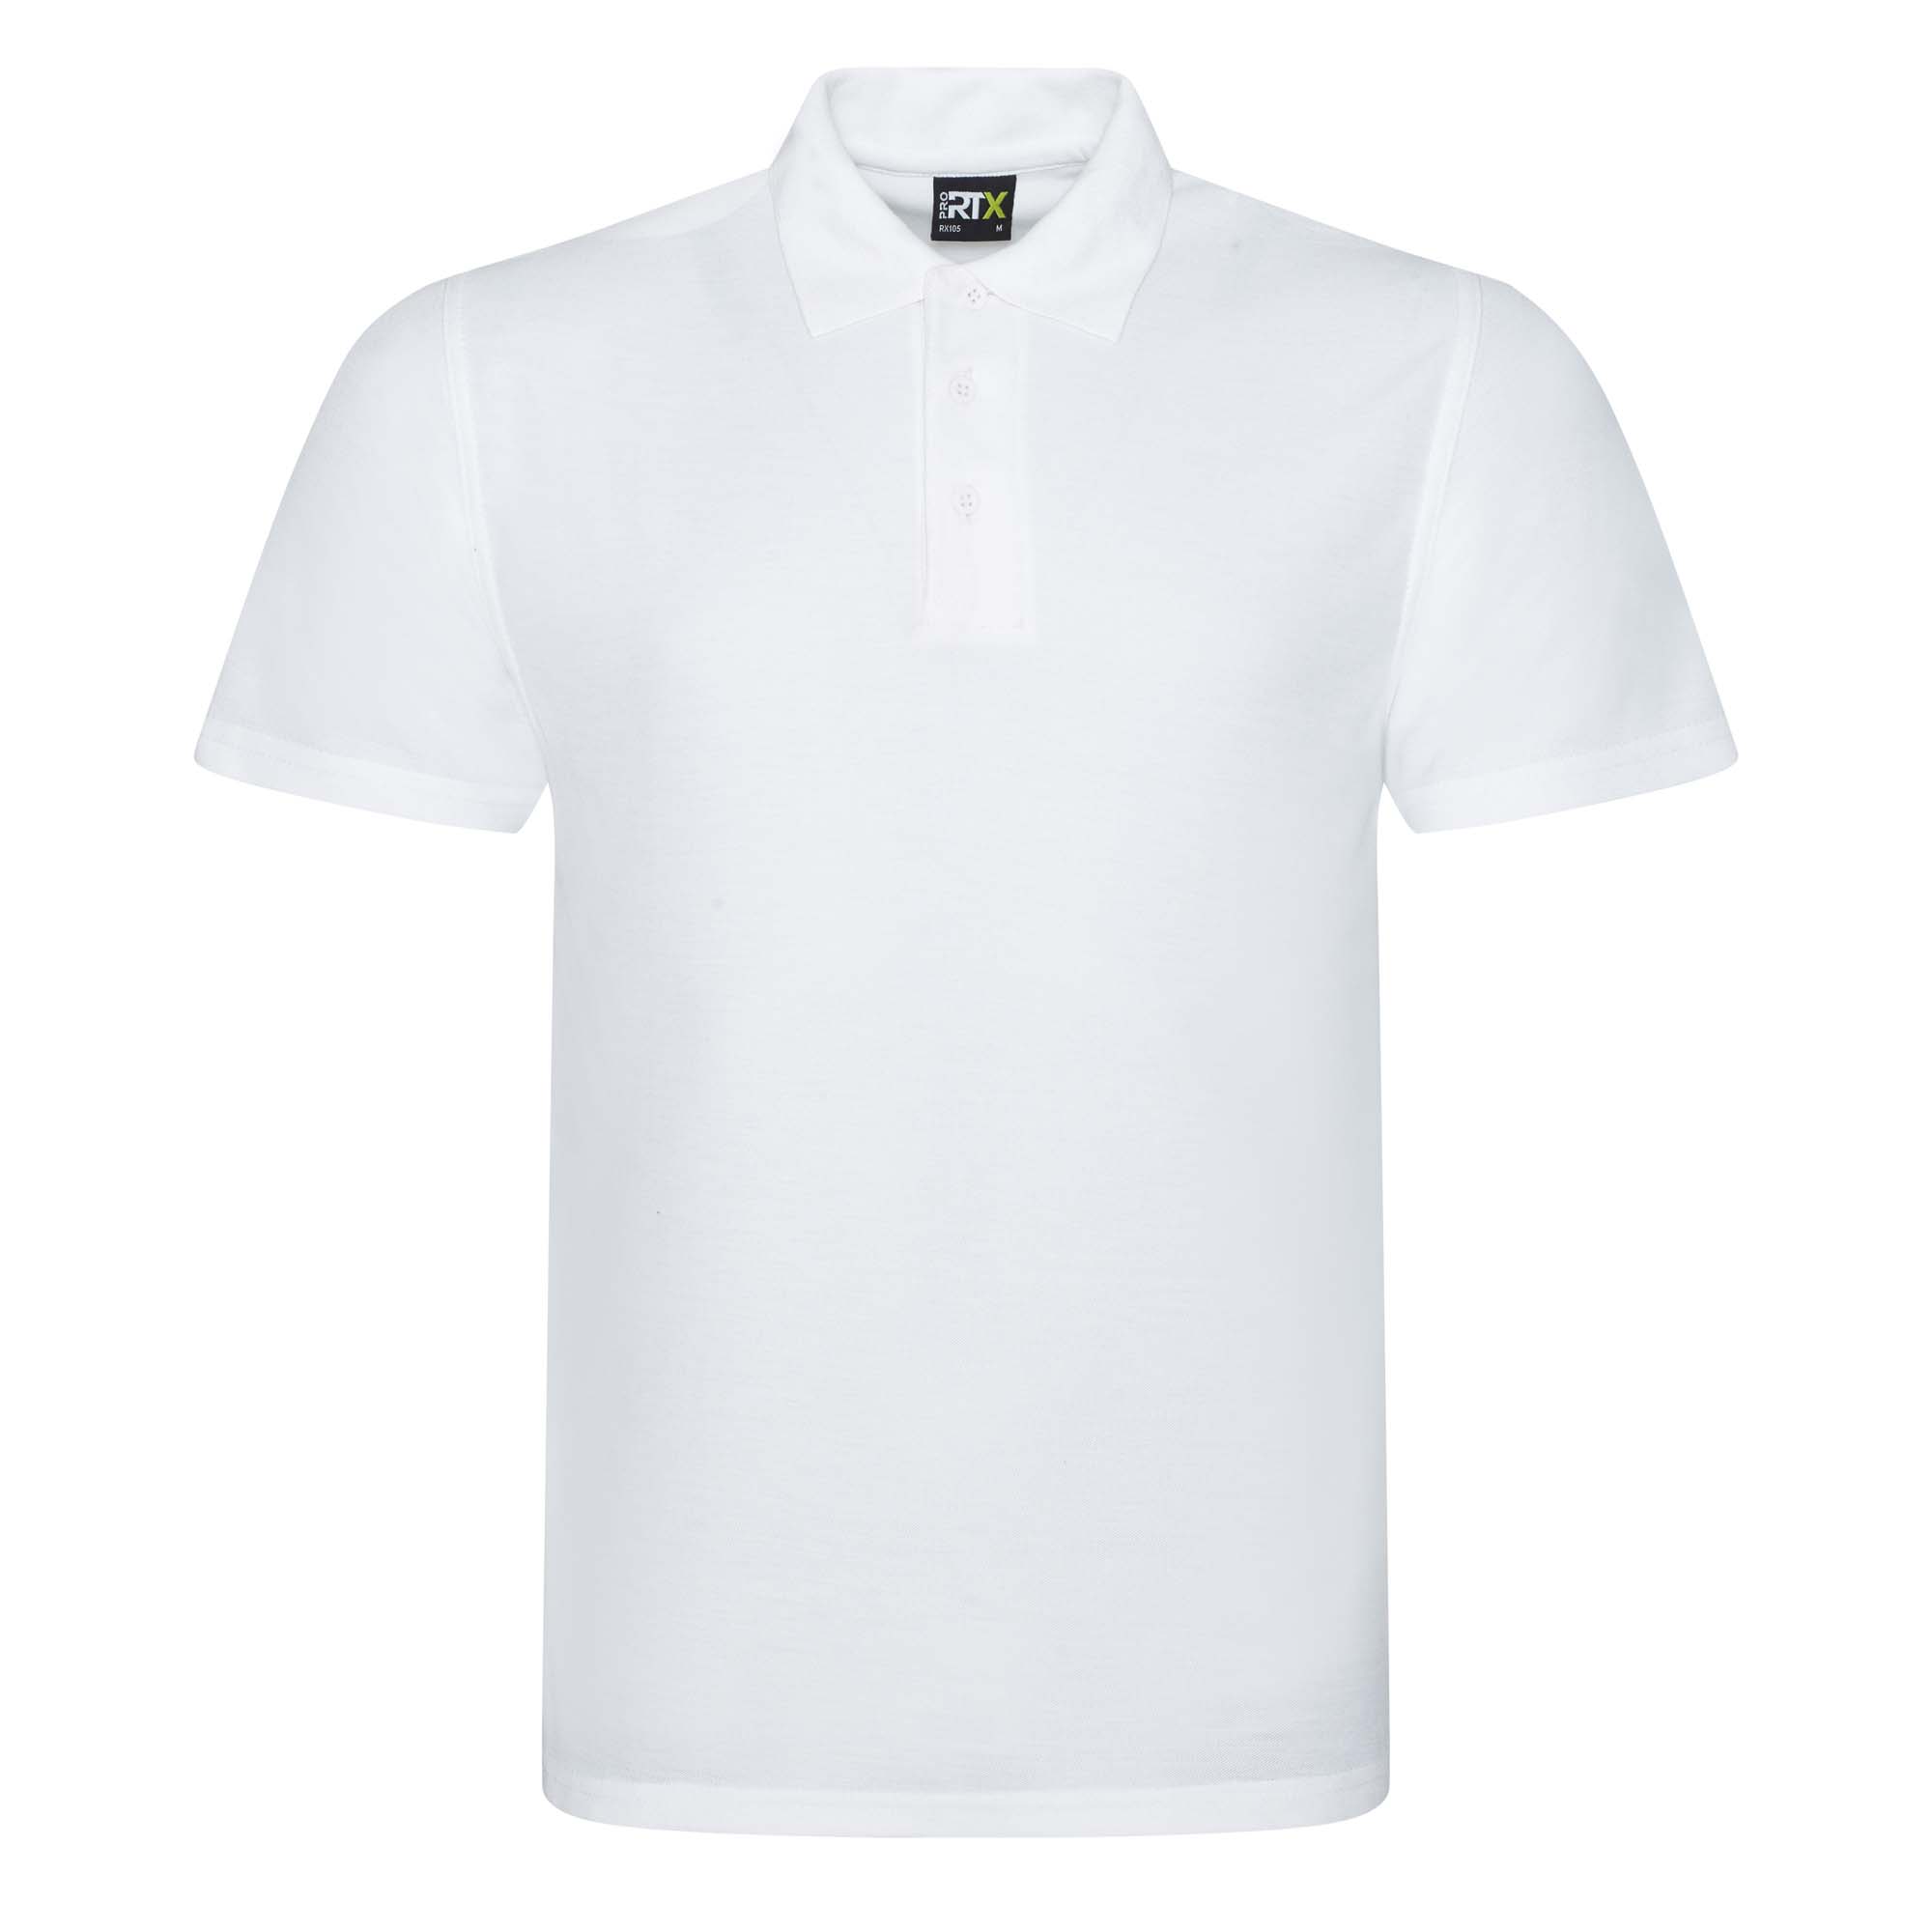 ax-httpswebsystems.s3.amazonaws.comtmp_for_downloadpro-rtx-pro-polyester-polo-white.jpg